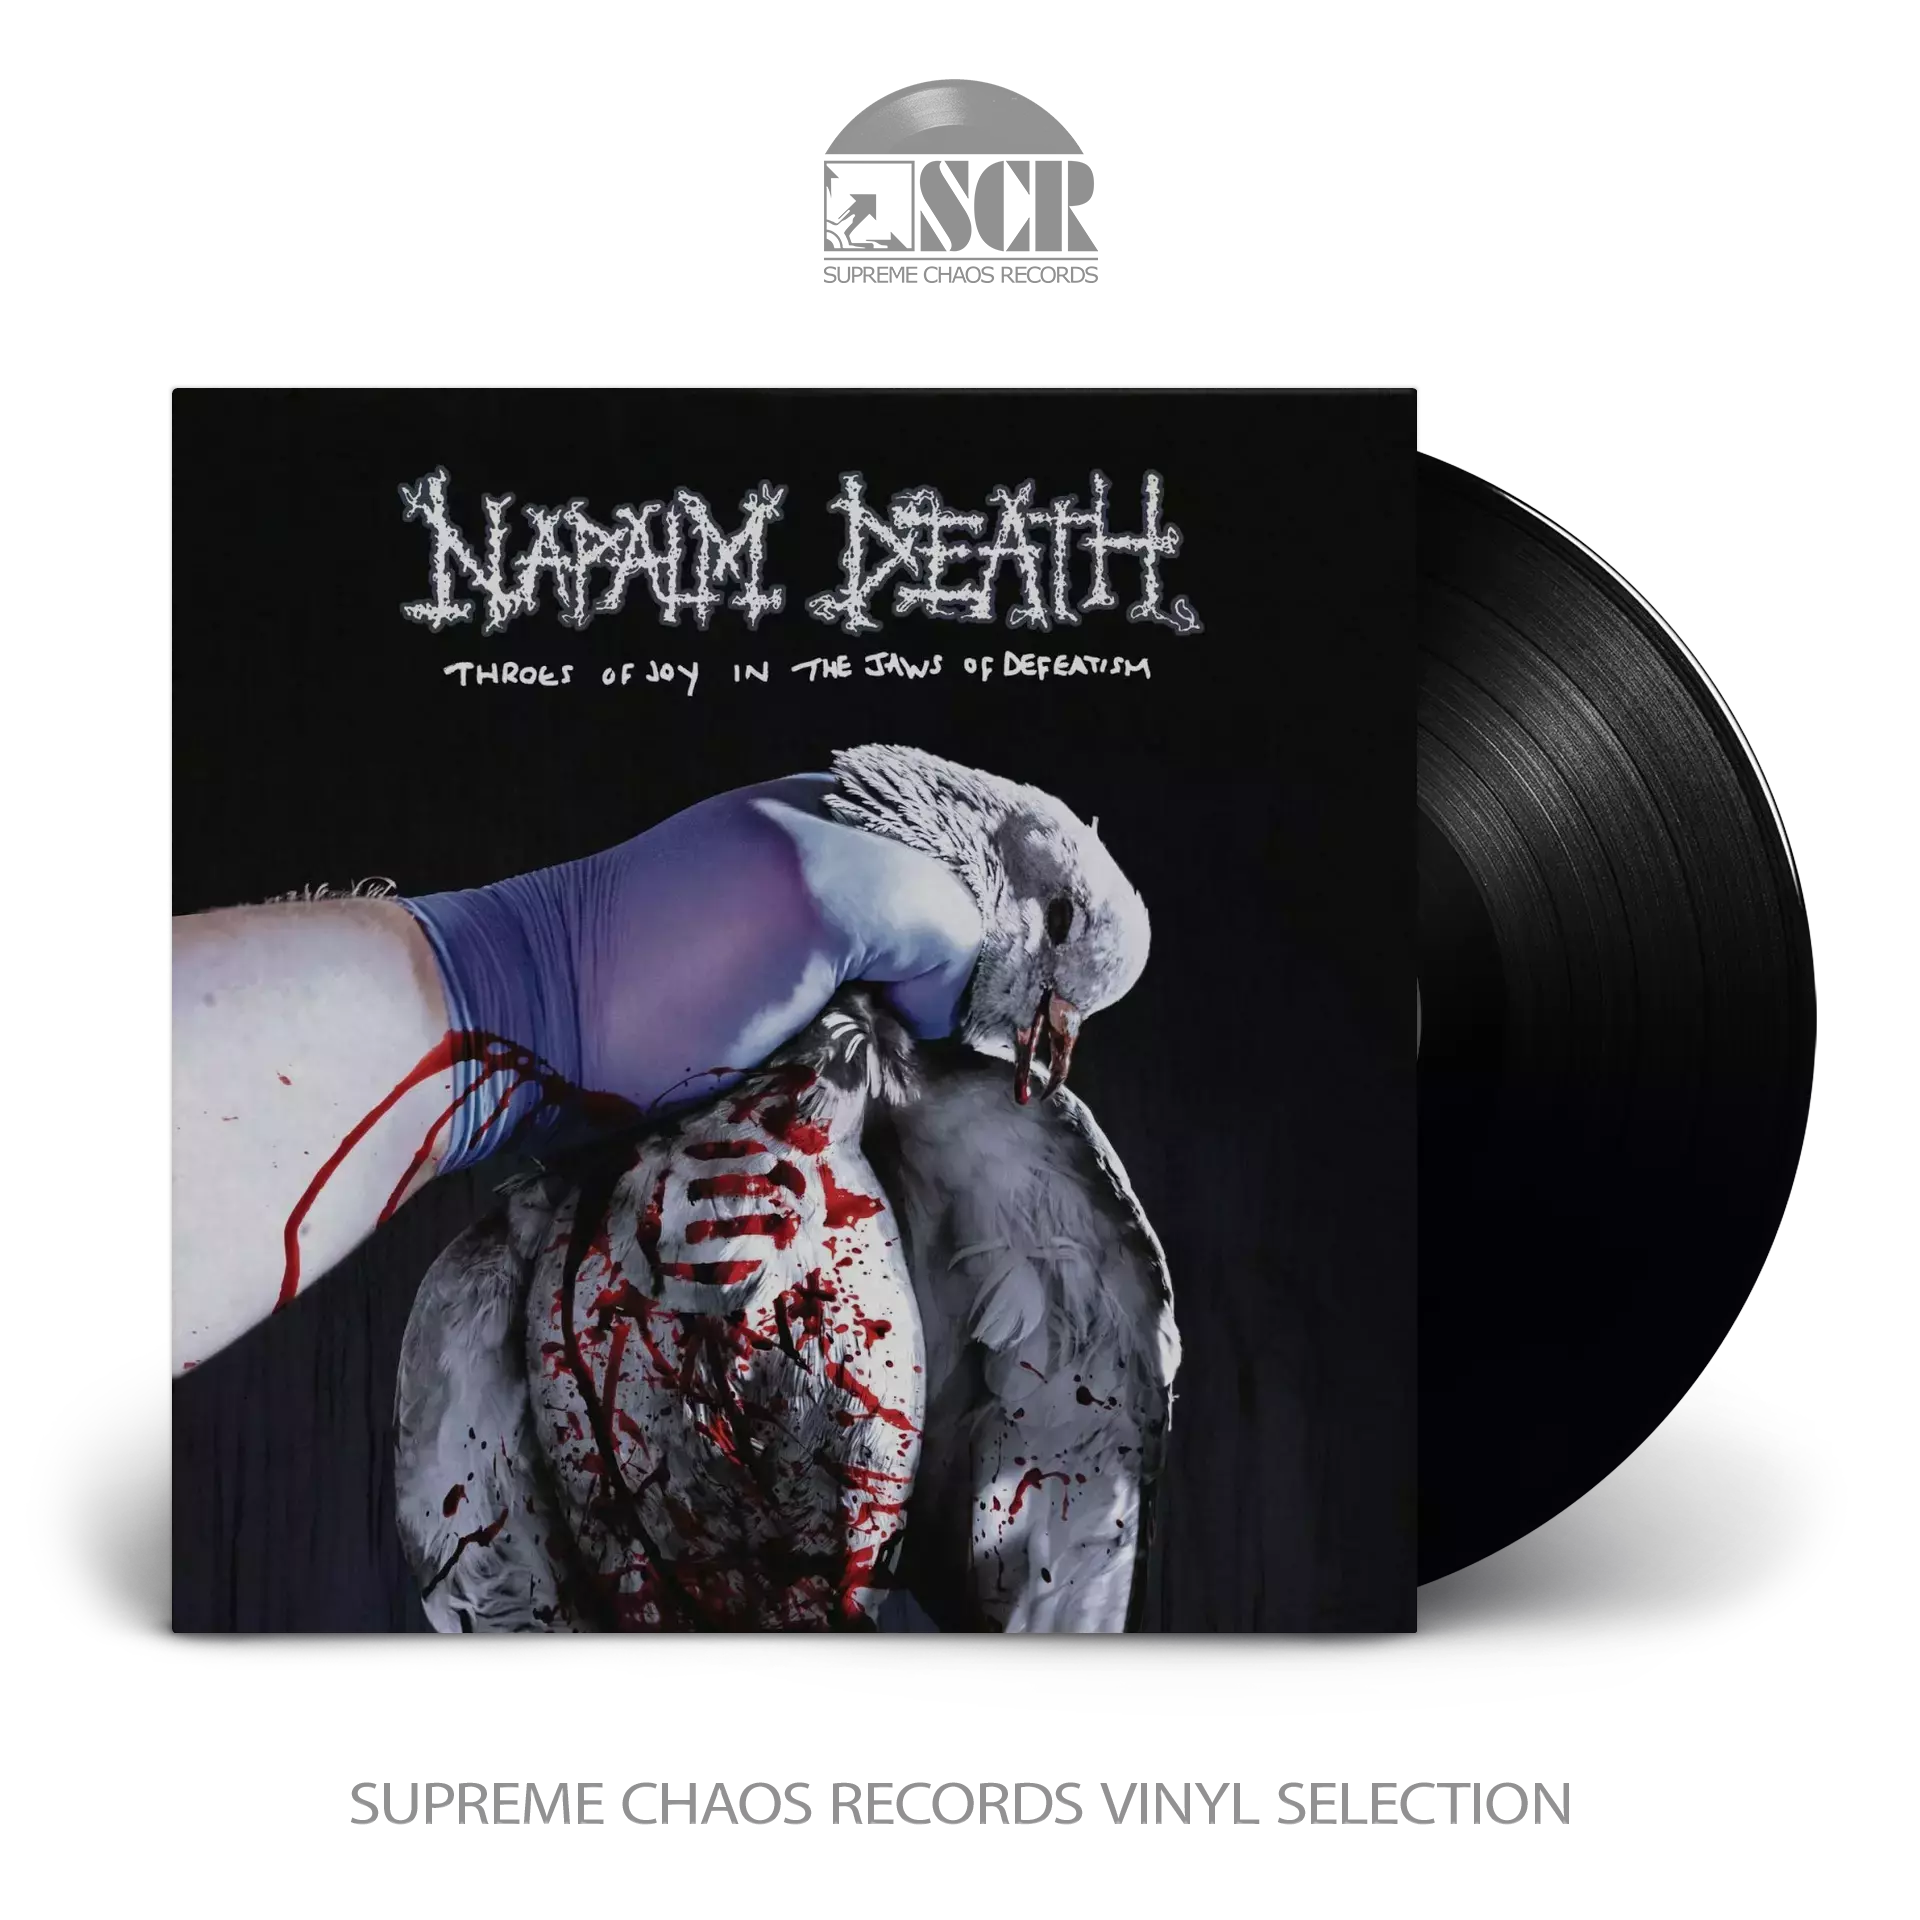 NAPALM DEATH - Throes of Joy in the Jaws of Defeatism [BLACK LP]